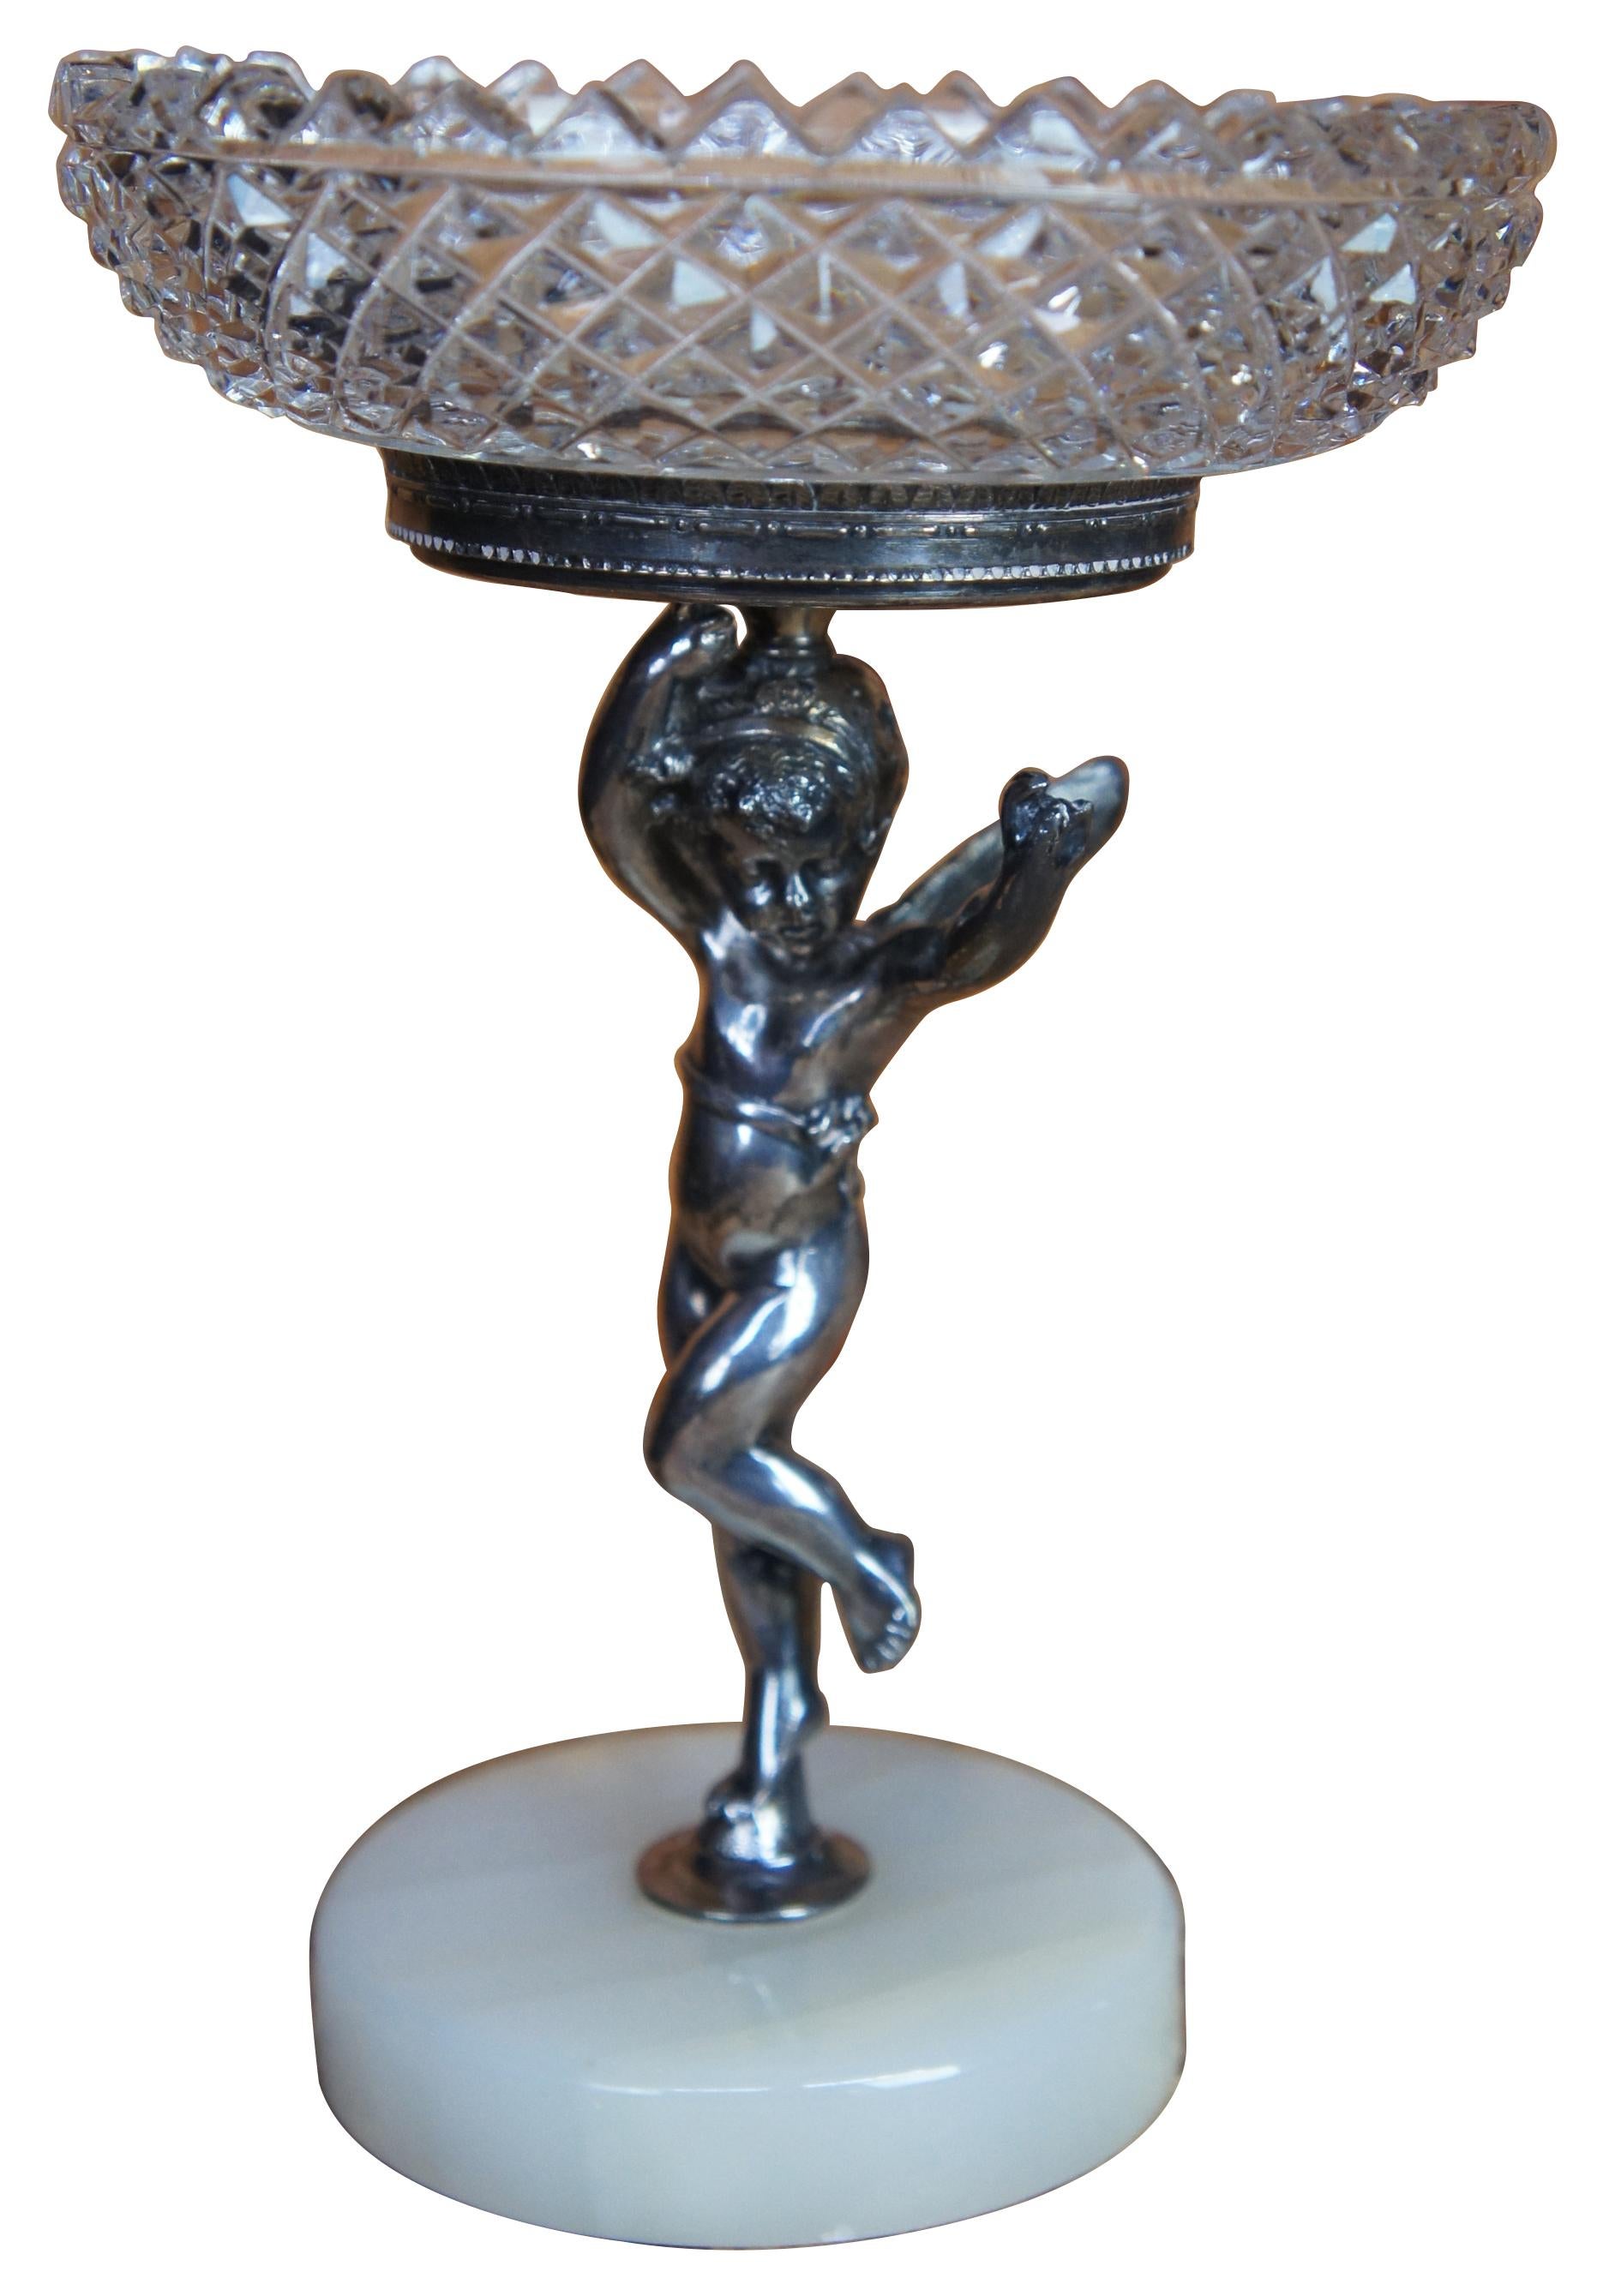 Pair of two antique Art Nouveau silver plate stands shaped like dancing fairies (instead of the usual wingless or angel-winged cherubs, these figures have dragonfly wings) on a white marble base and topped with cut glass compotes. Measure: 7